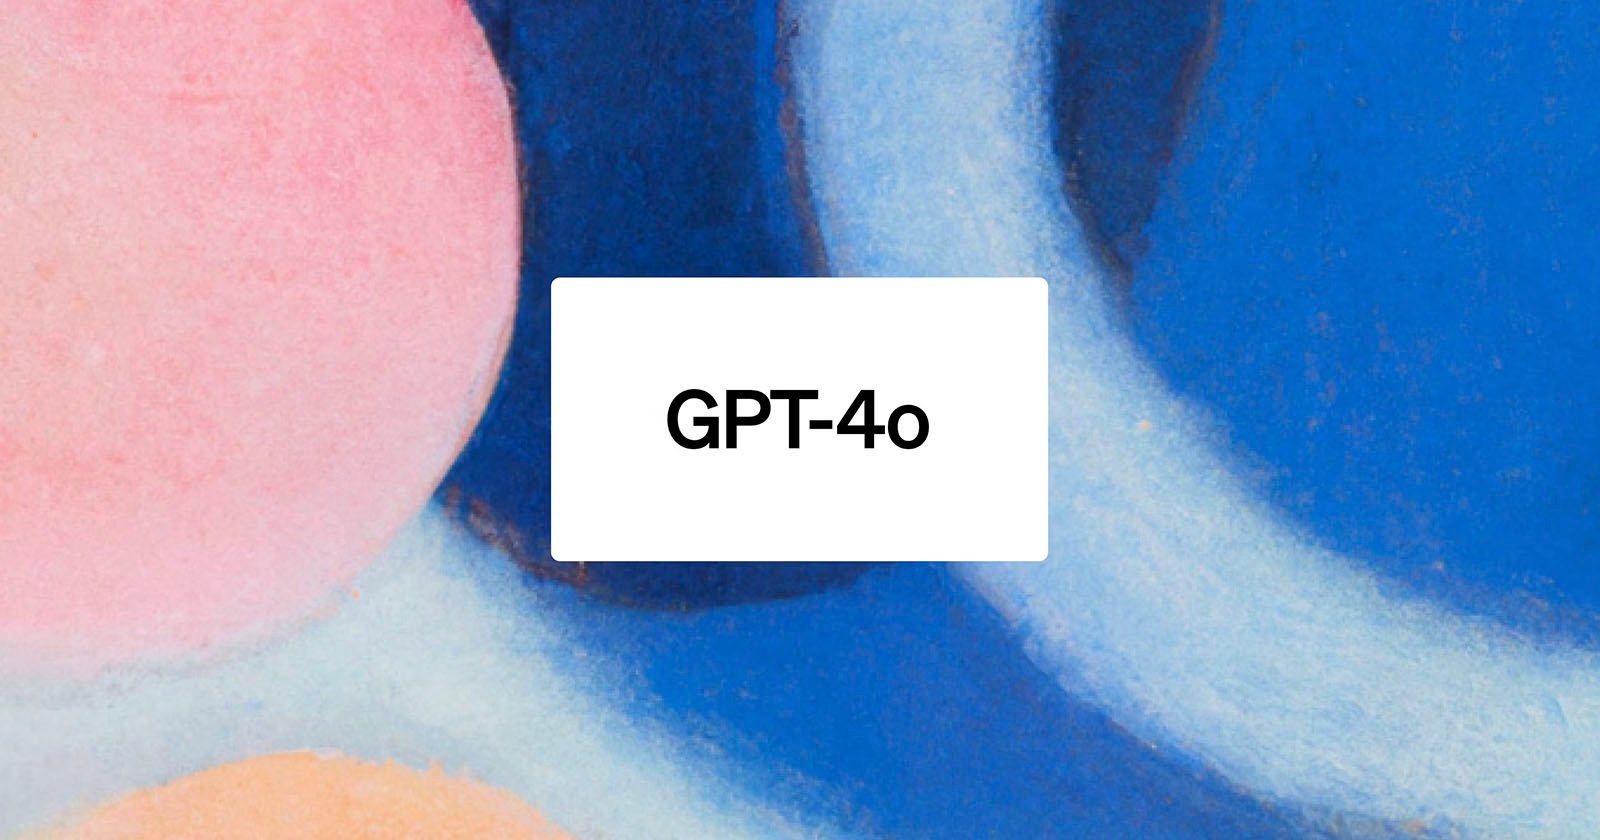 Close-up of an abstract painting showing vibrant blue tones with soft pink and orange circular shapes, partially obscured by a white rectangle labeled GPT-40.